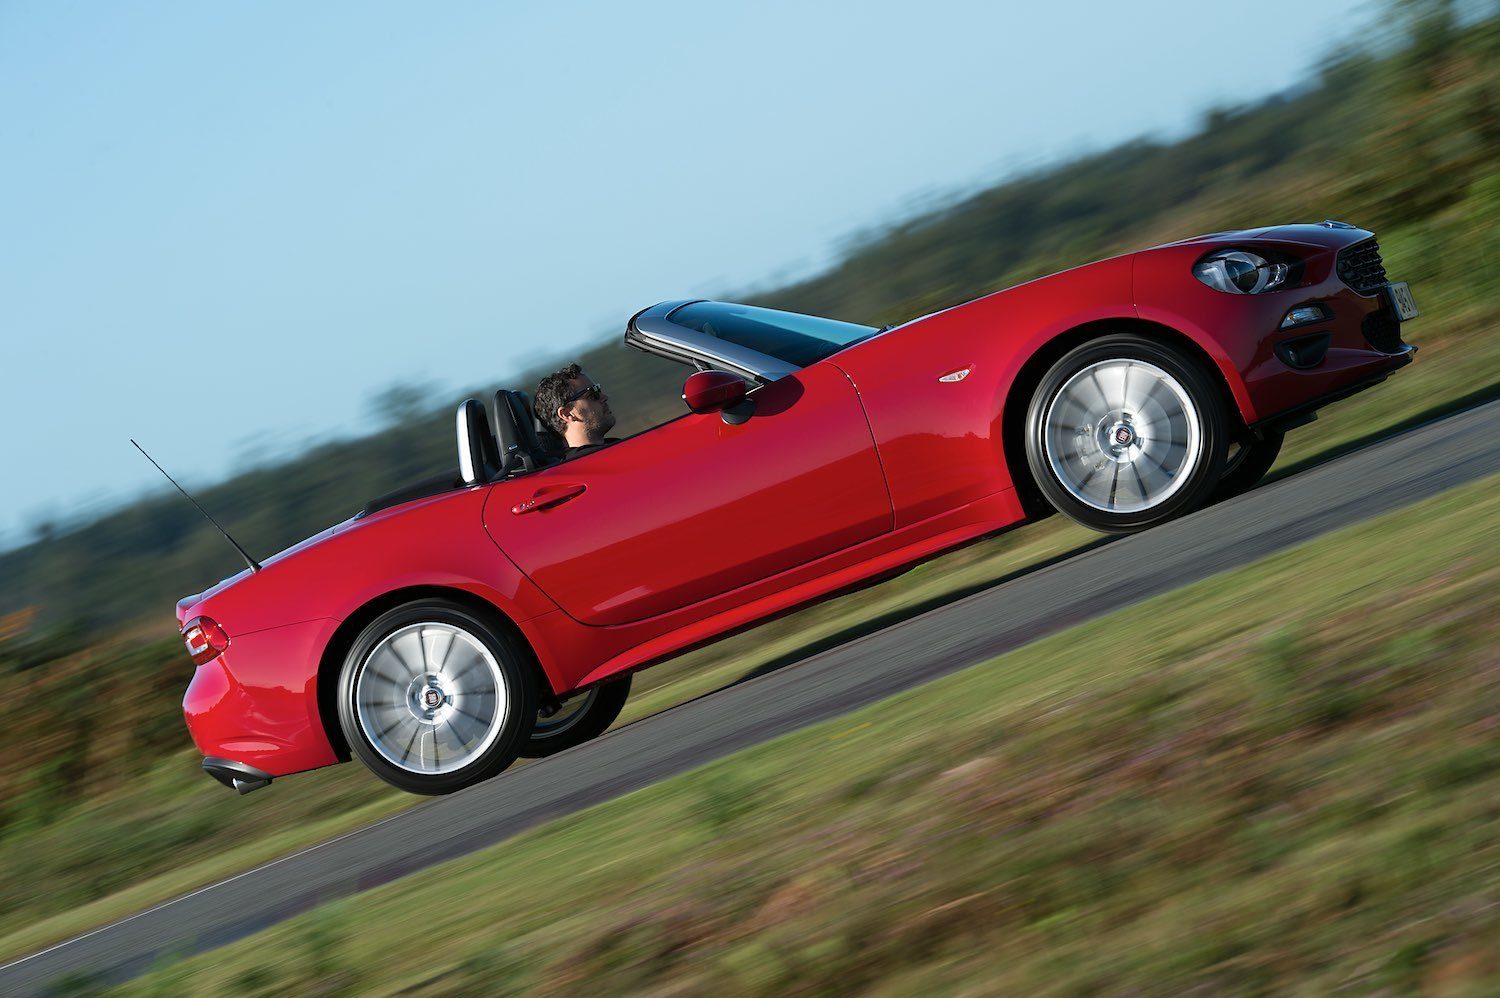 Tom Scanlan reviews the Fiat 124 Spider for Drive 7